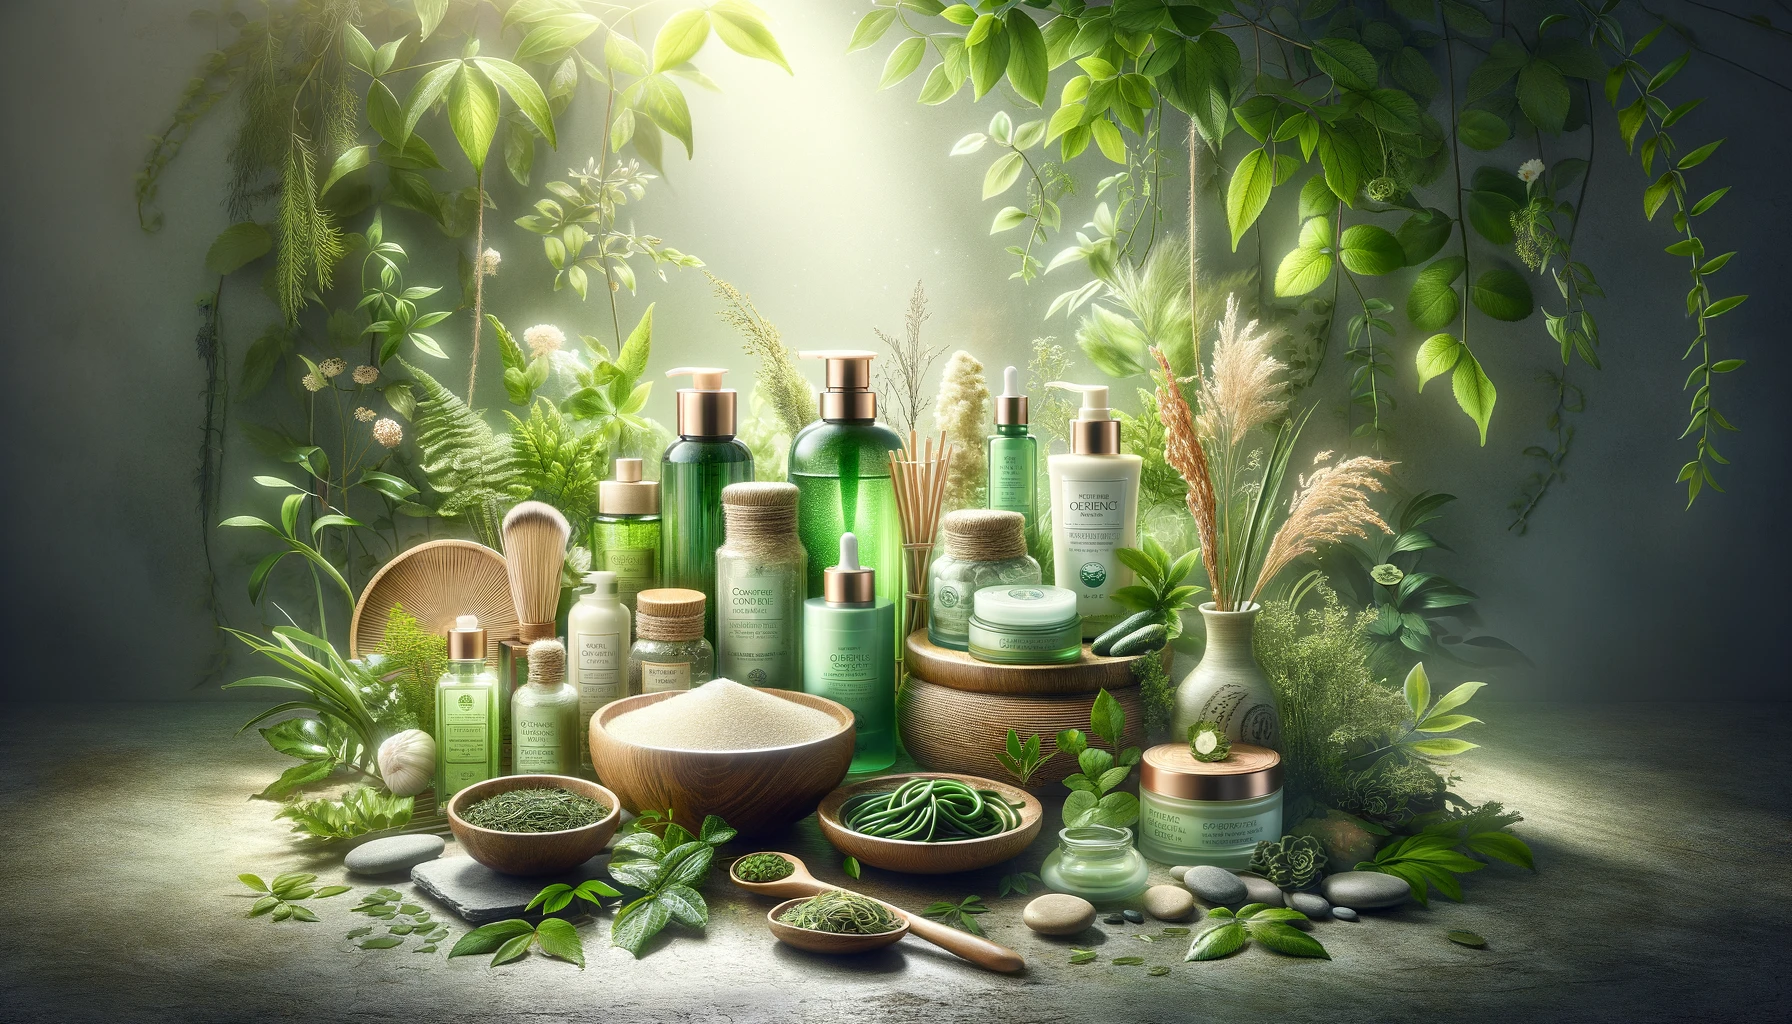 Organic Korean skincare products with natural ingredients green tea, ginseng, and rice bran, arranged amidst lush greenery under soft natural lighting, symbolizing eco-friendly beauty solutions.